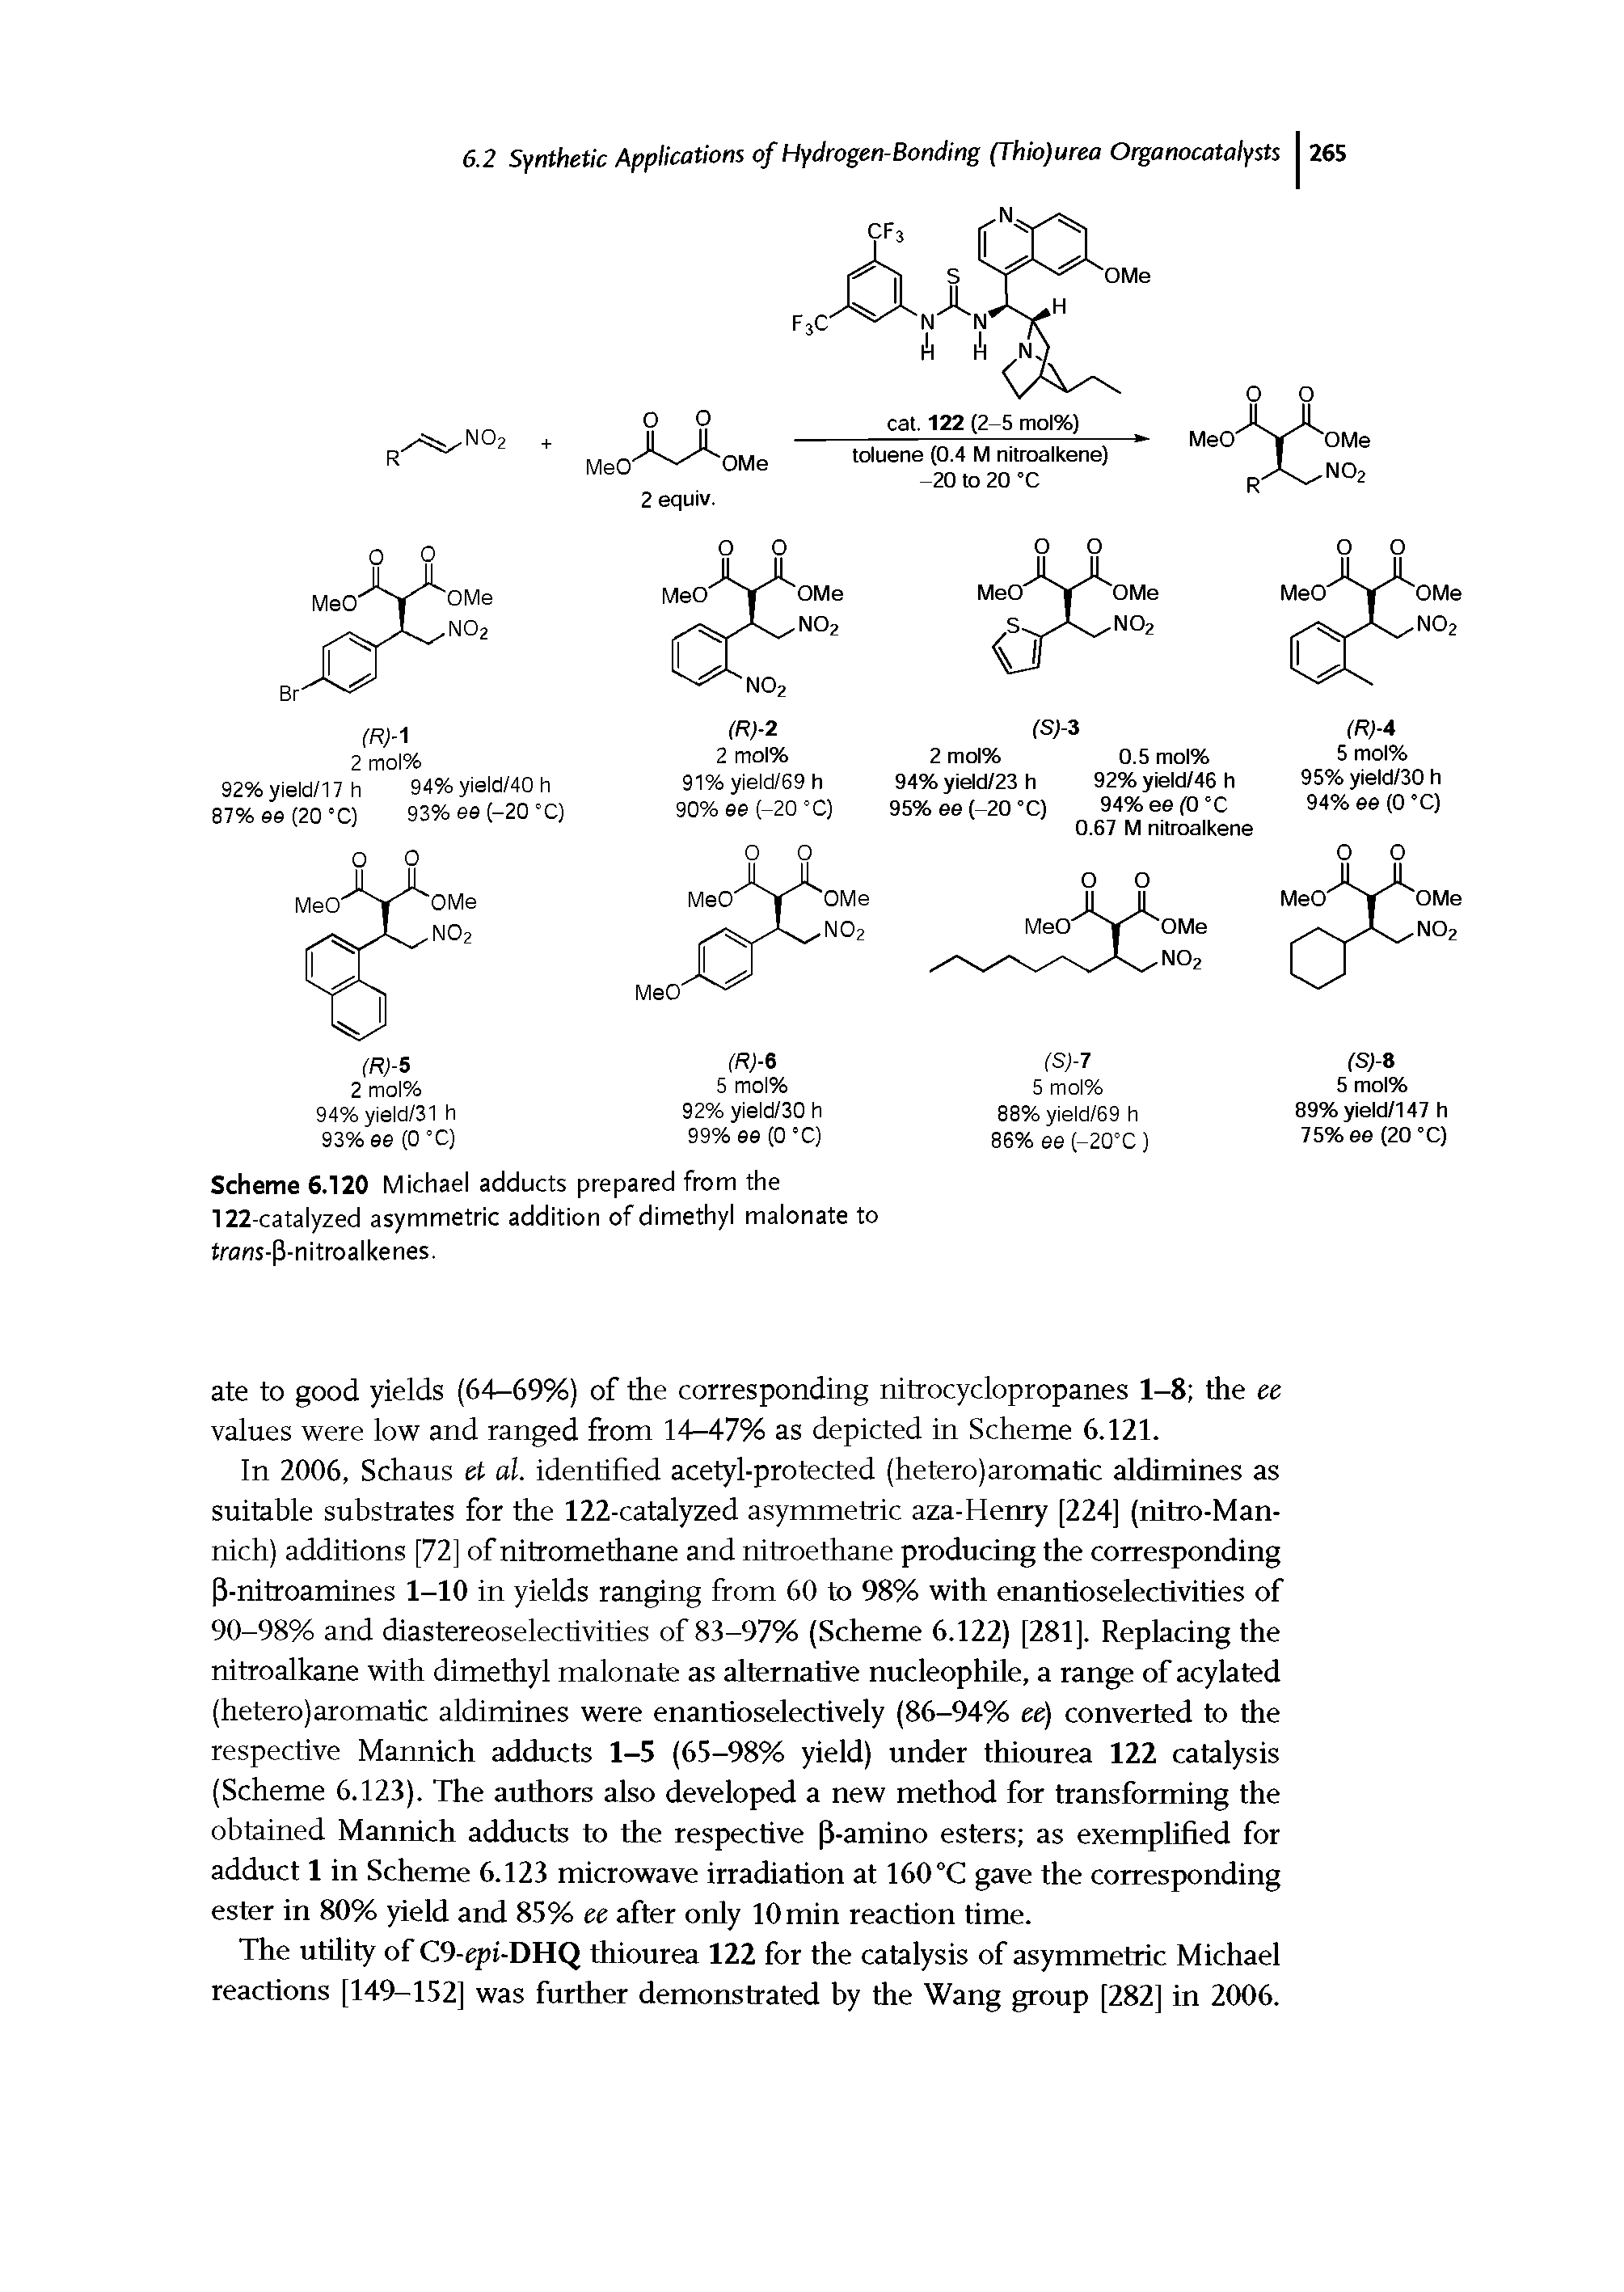 Scheme 6.120 Michael adducts prepared from the 122-catalyzed asymmetric addition of dimethyl malonate to trans-P-nitroalkenes.